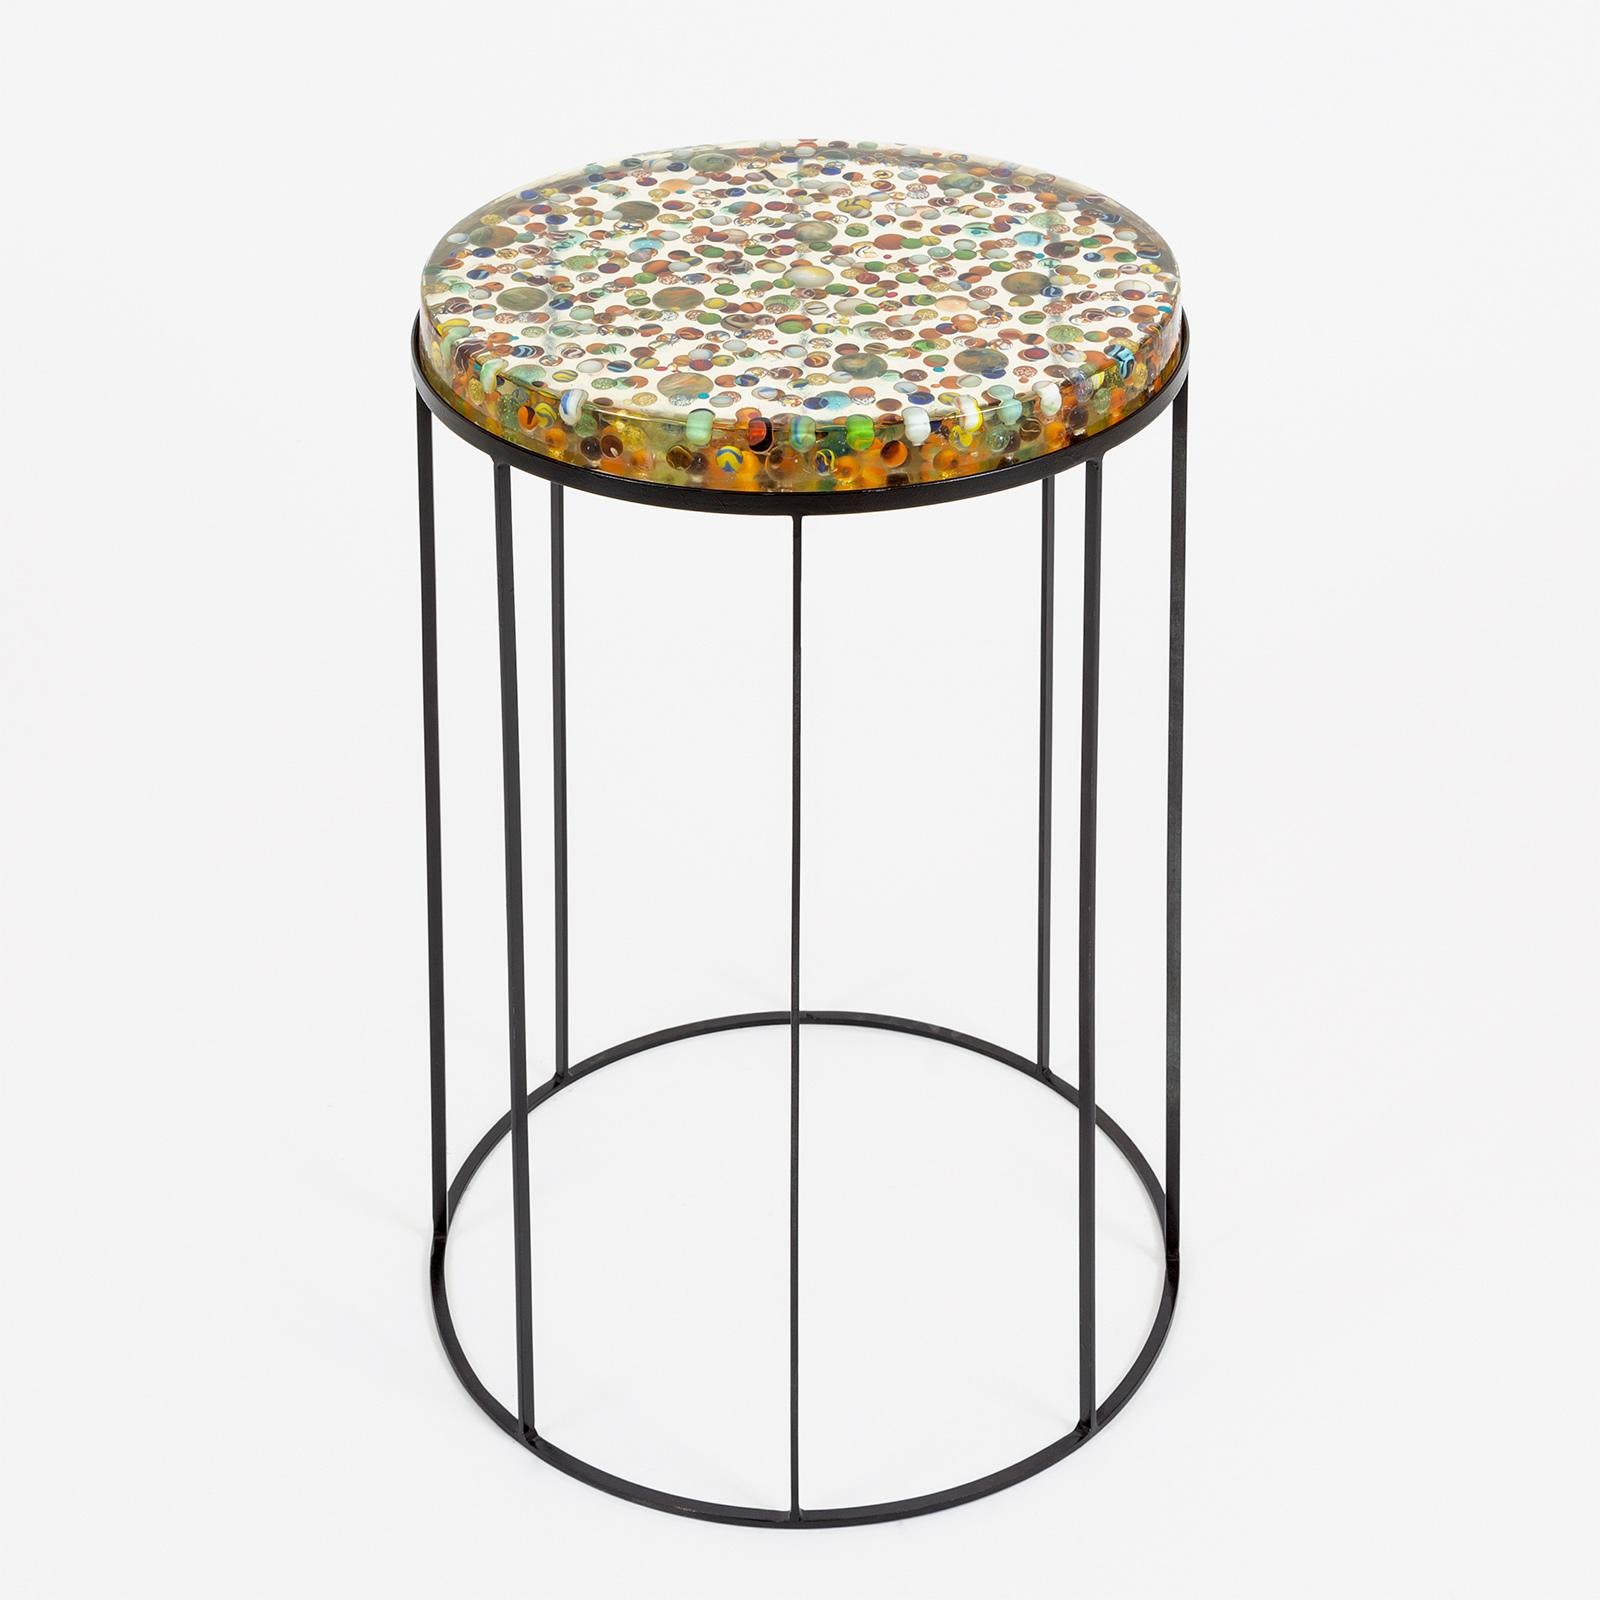 This beautiful side table is linked with memories, represented by little objects, images, memorabilia of Artist’s travel around the world, fragments of her life all combined together to creates stunning tableaux vivants which becomes functional.